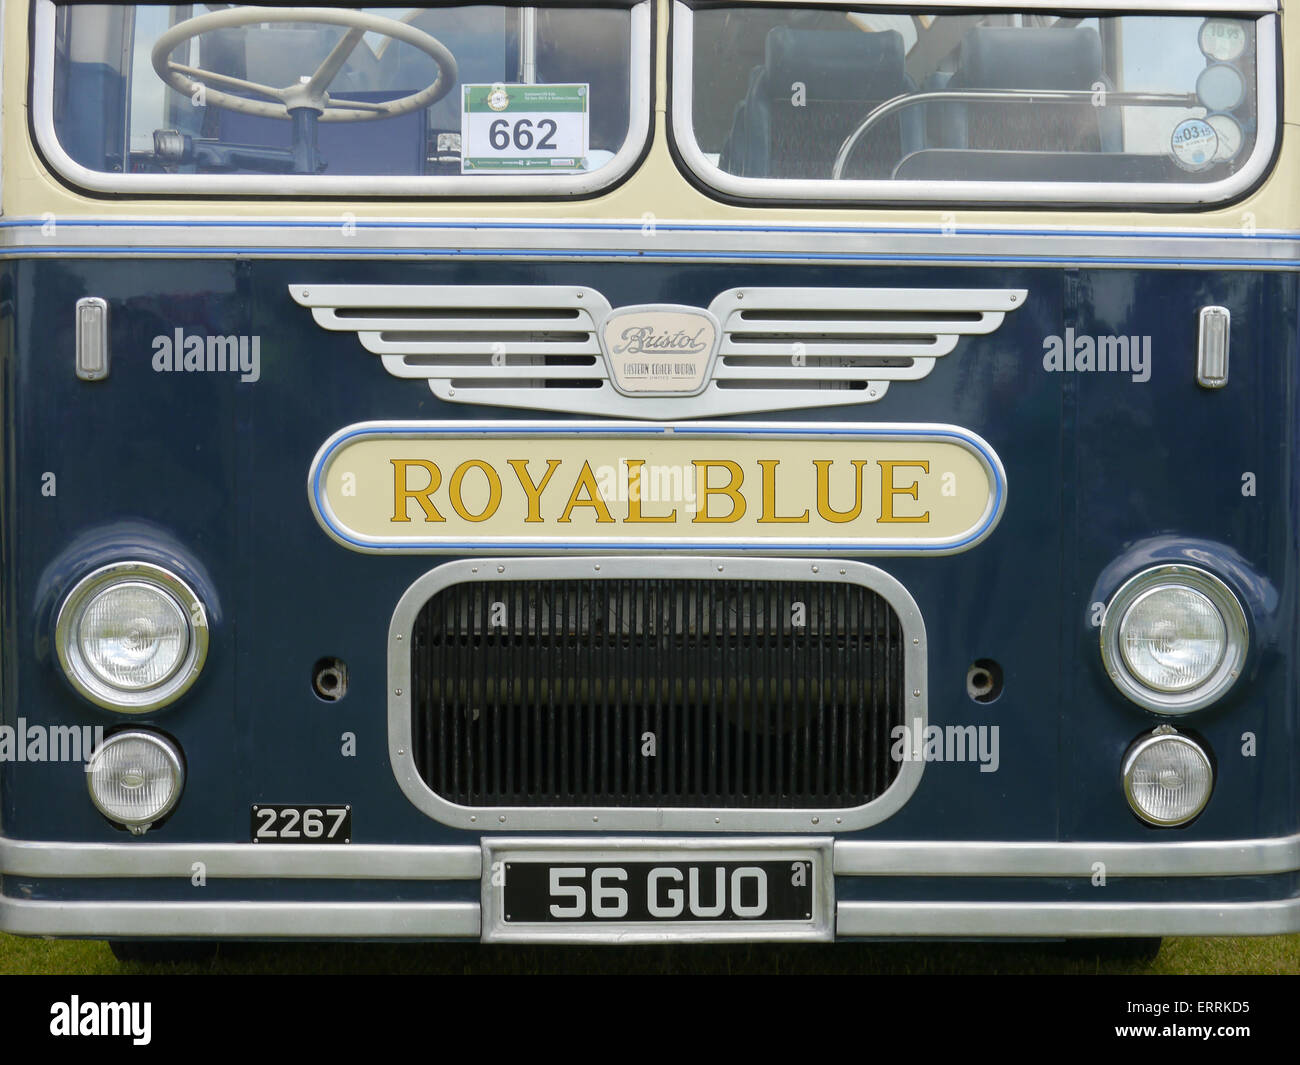 Western National 2267 in Royal Blue livery, registration number 56 GUO Stock Photo